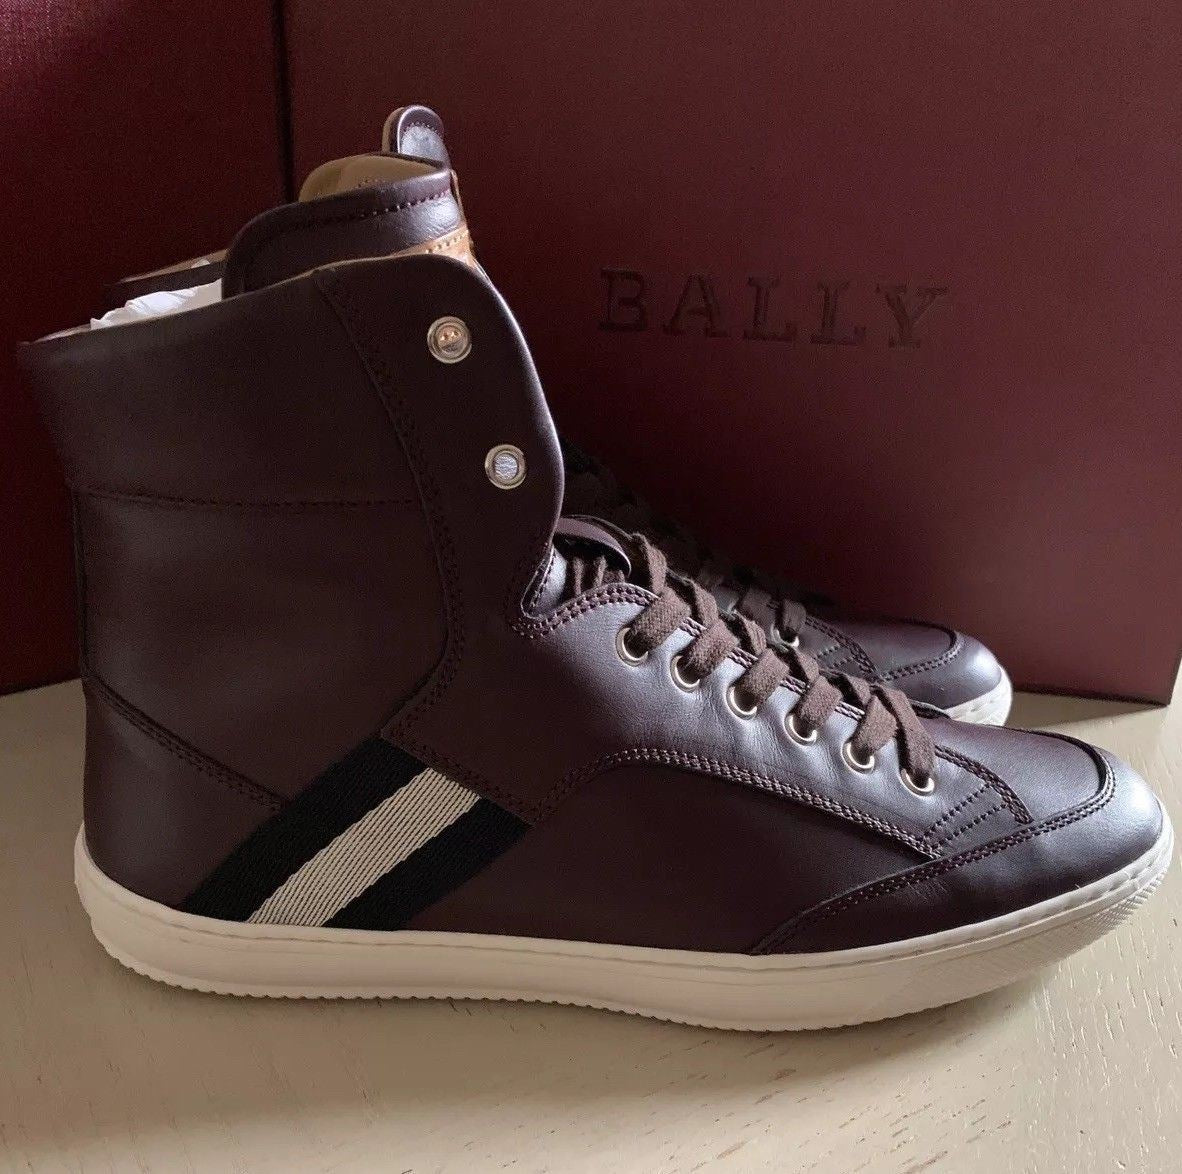 New $650 Bally Men Oldani Leather High-Top Sneakers Color Merlot 8 US Italy